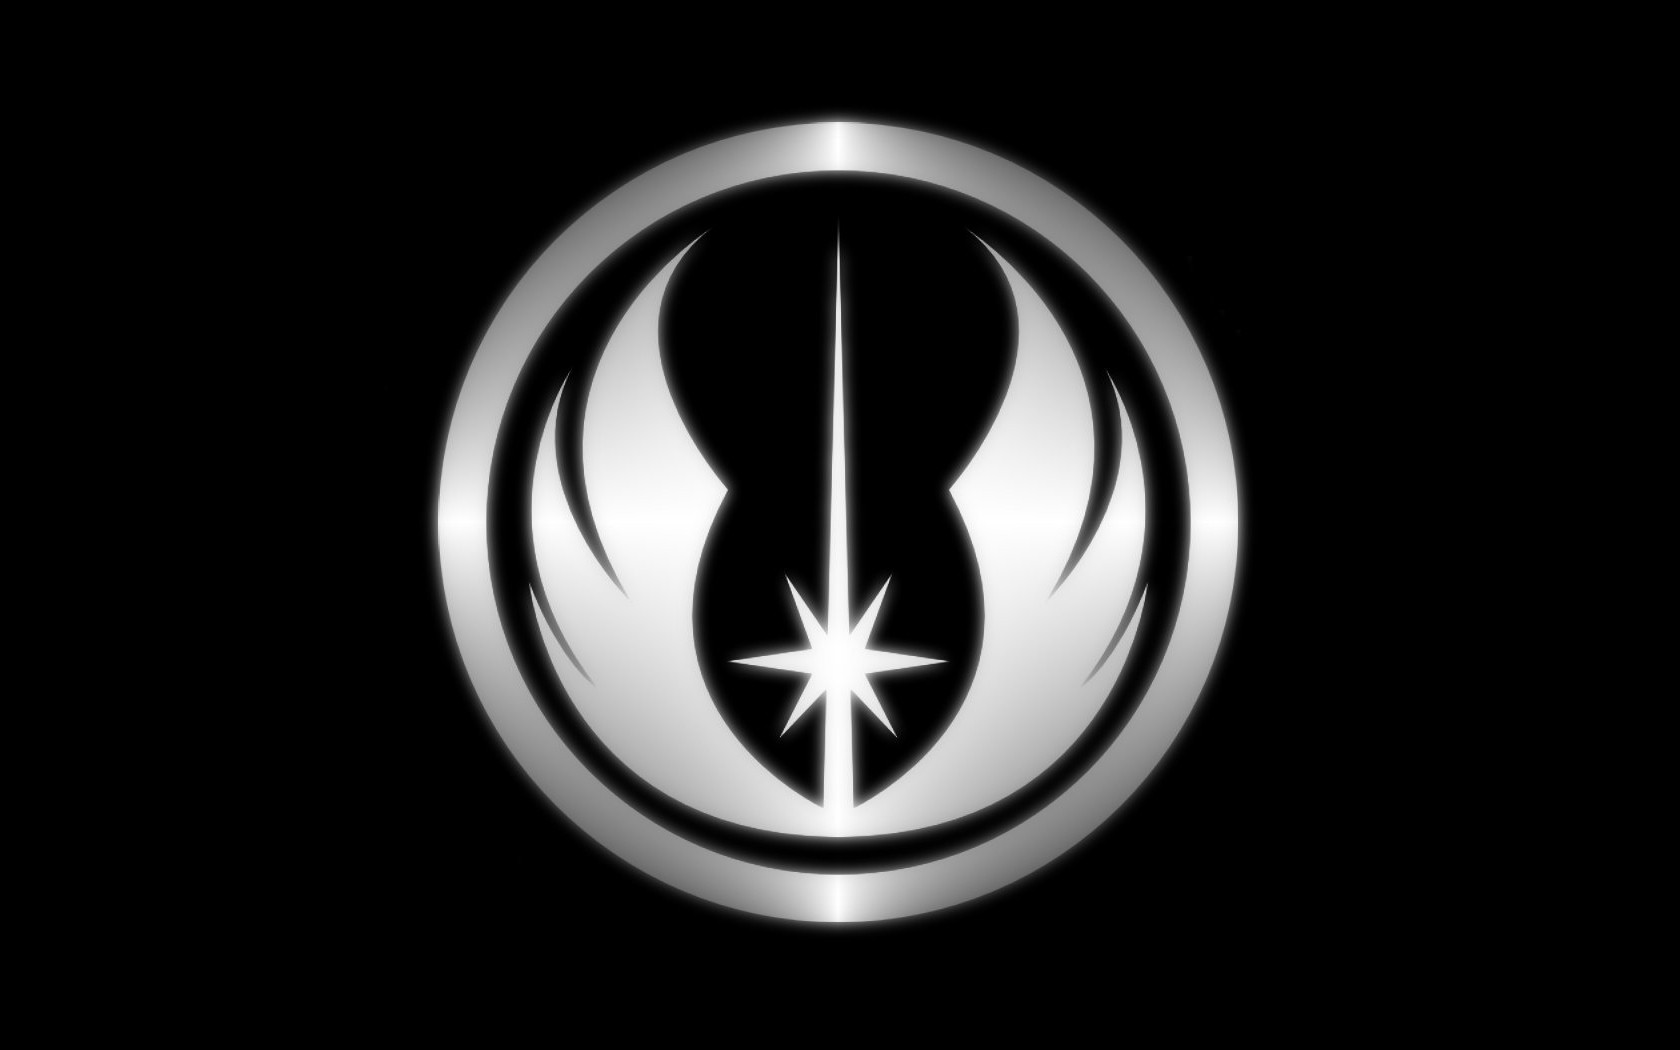 General 1680x1050 Star Wars logo science fiction simple background